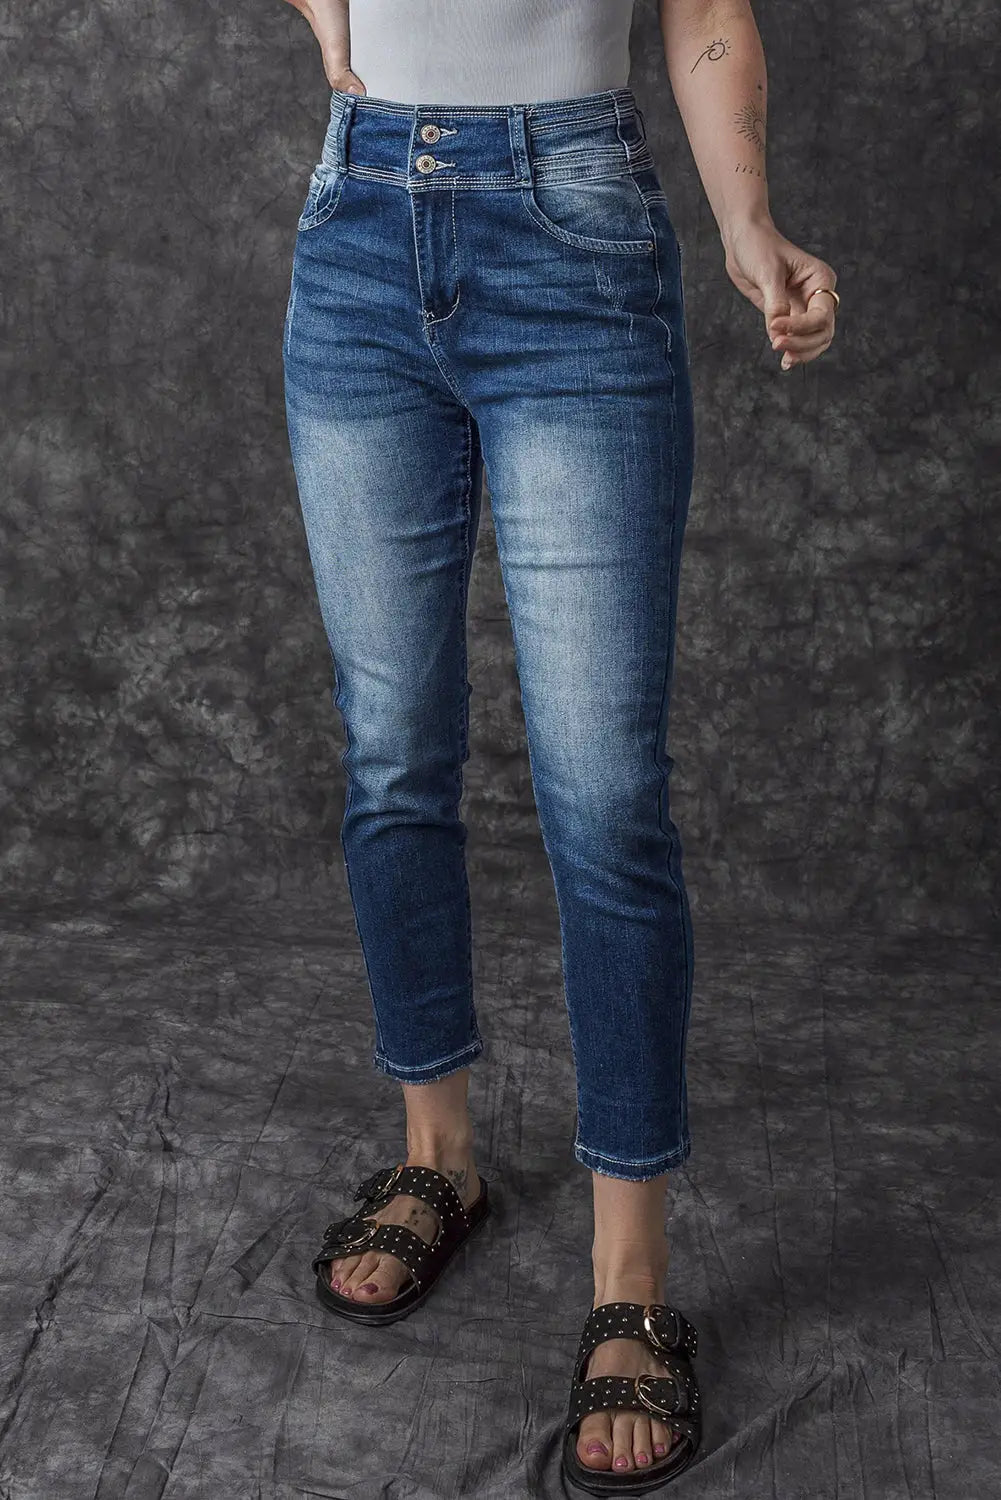 Blue vintage washed two-button high waist skinny jeans - bottoms